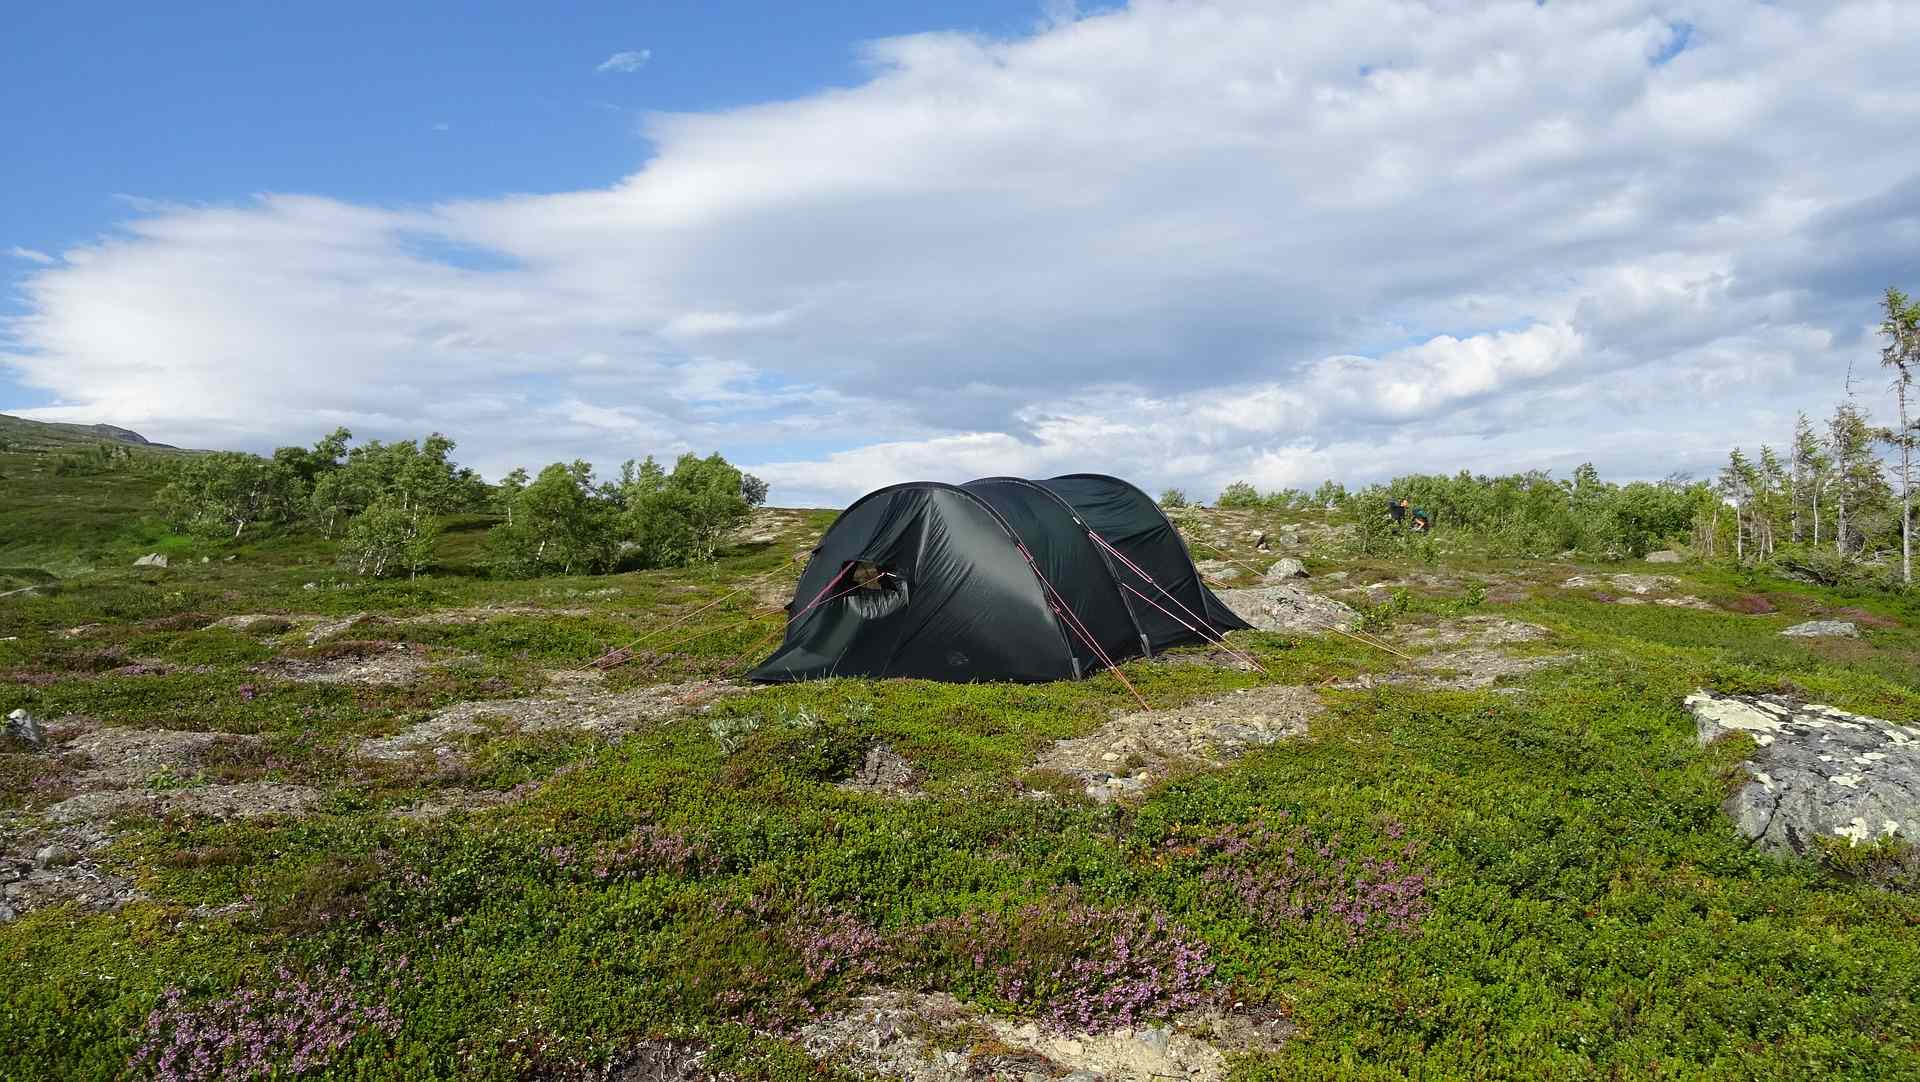 Wild camping only with respect for nature